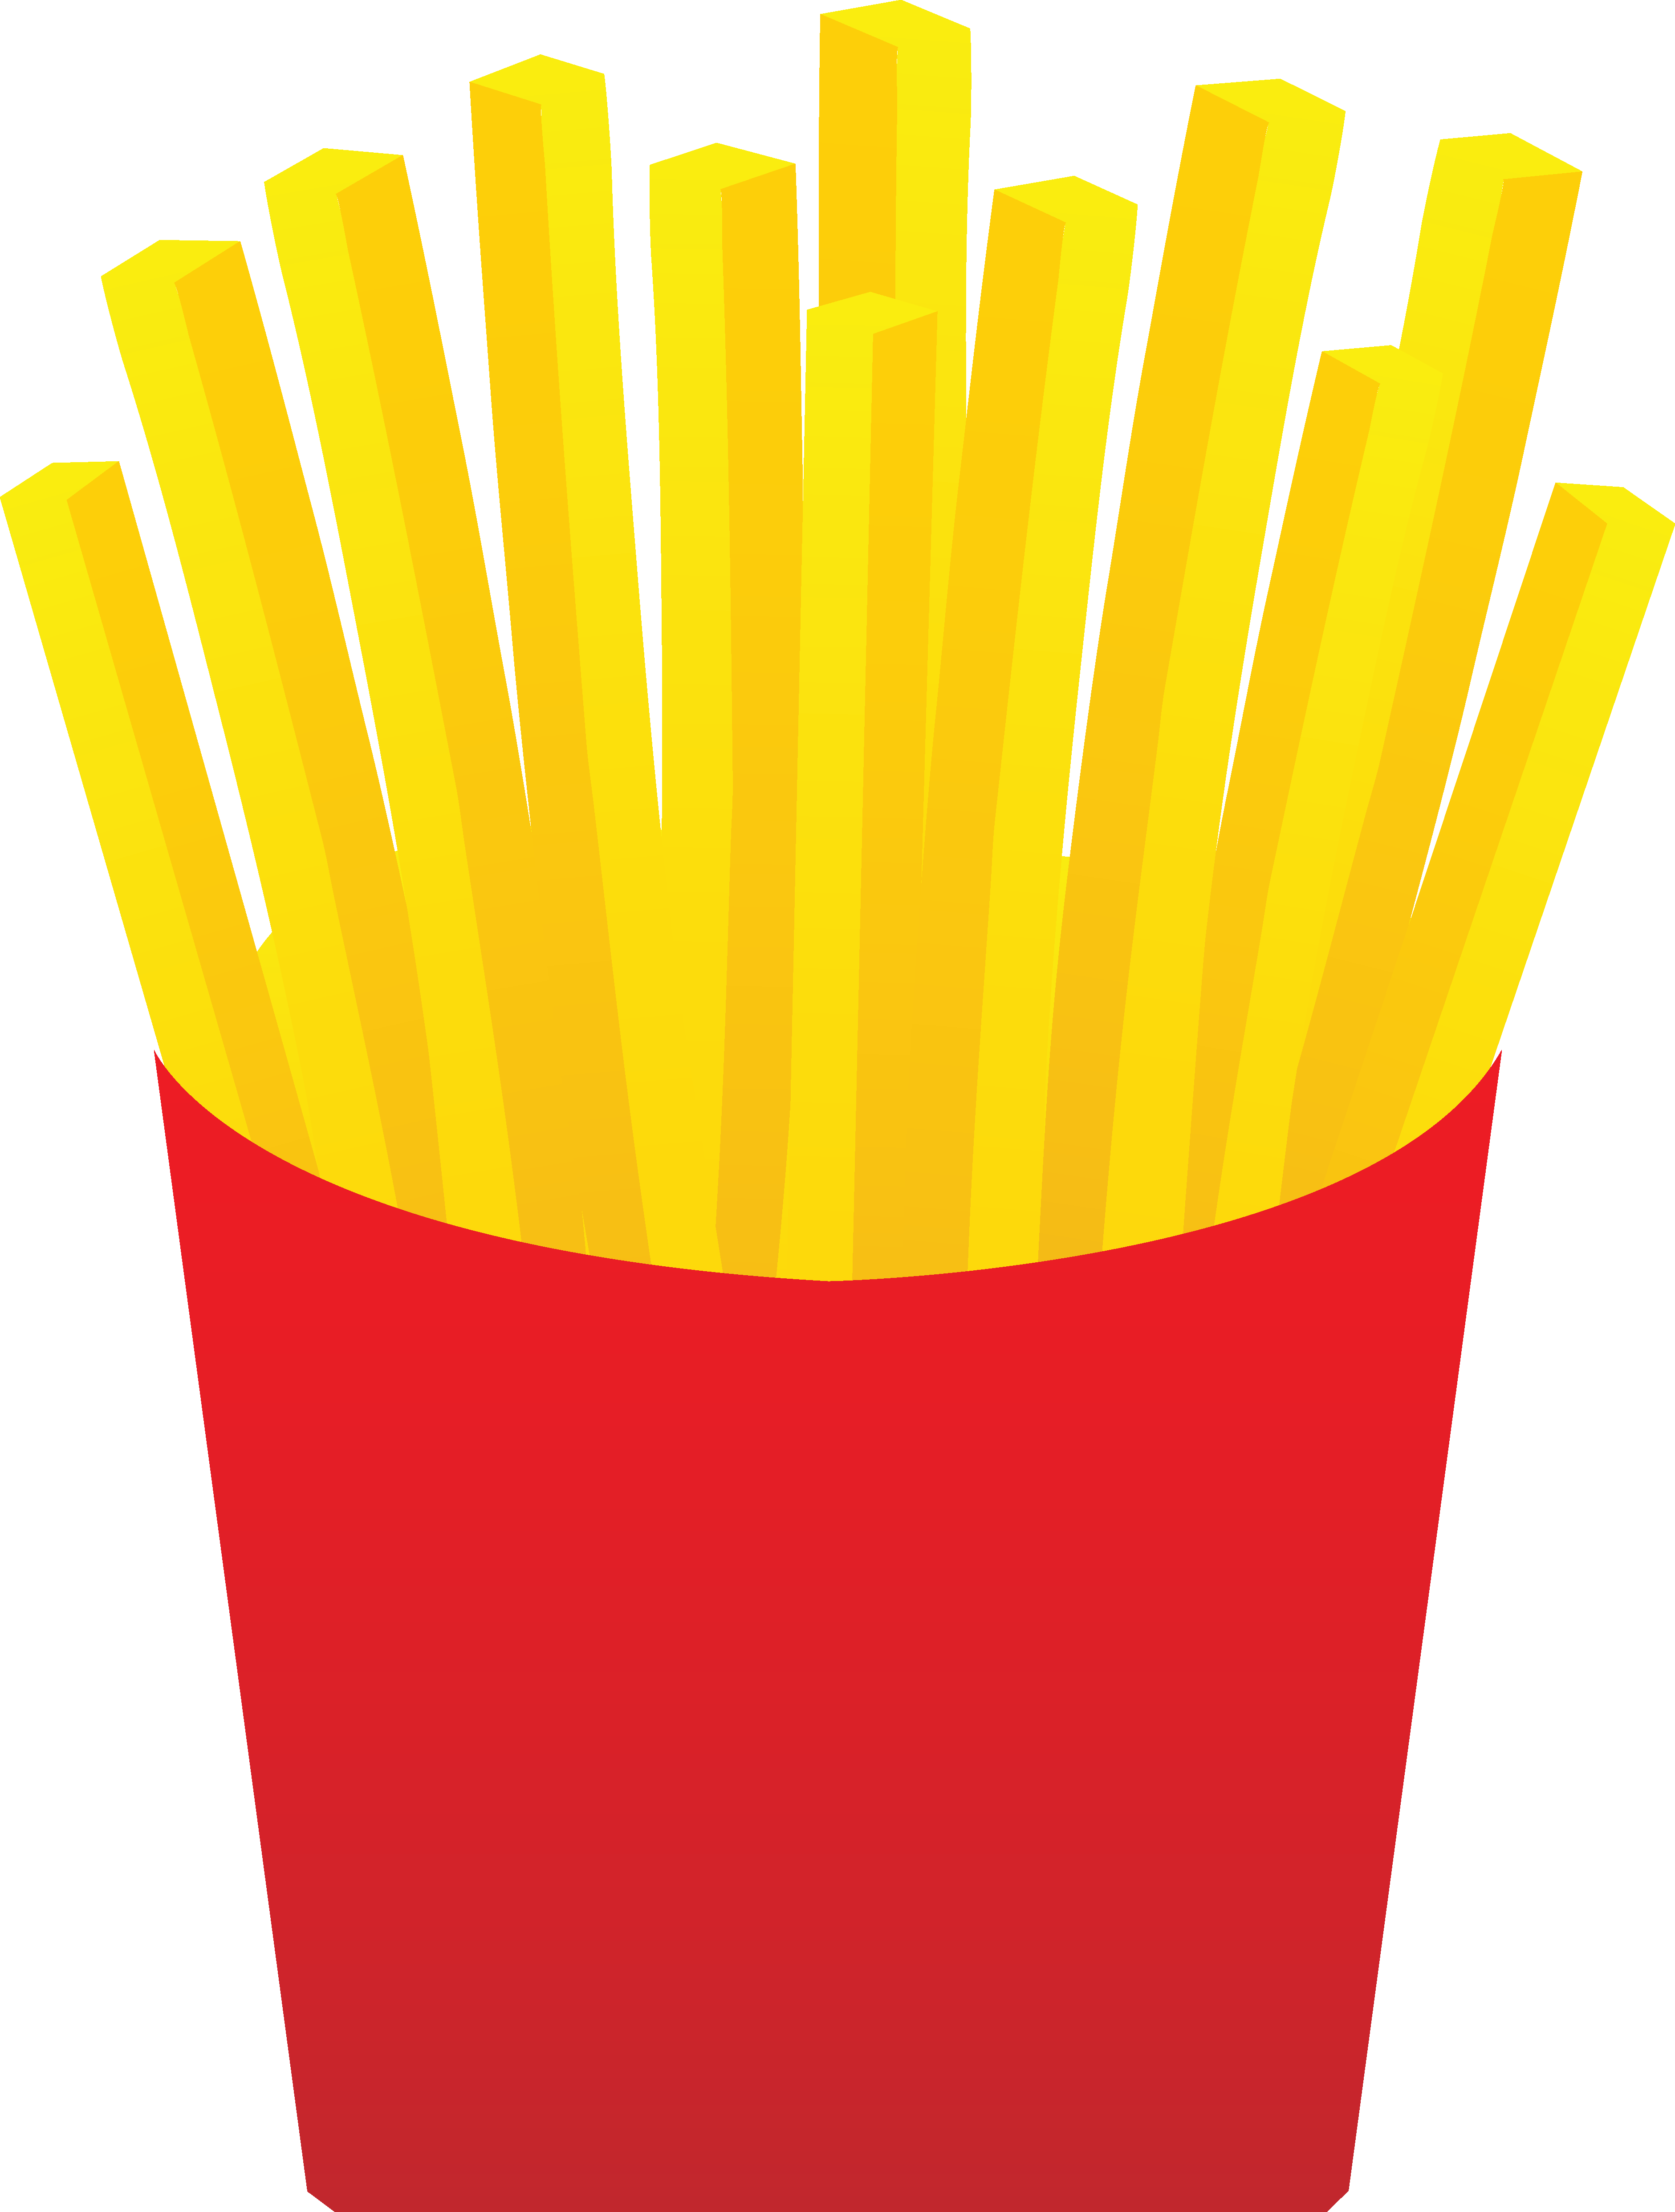 Cartoon French Fries - Cliparts.co